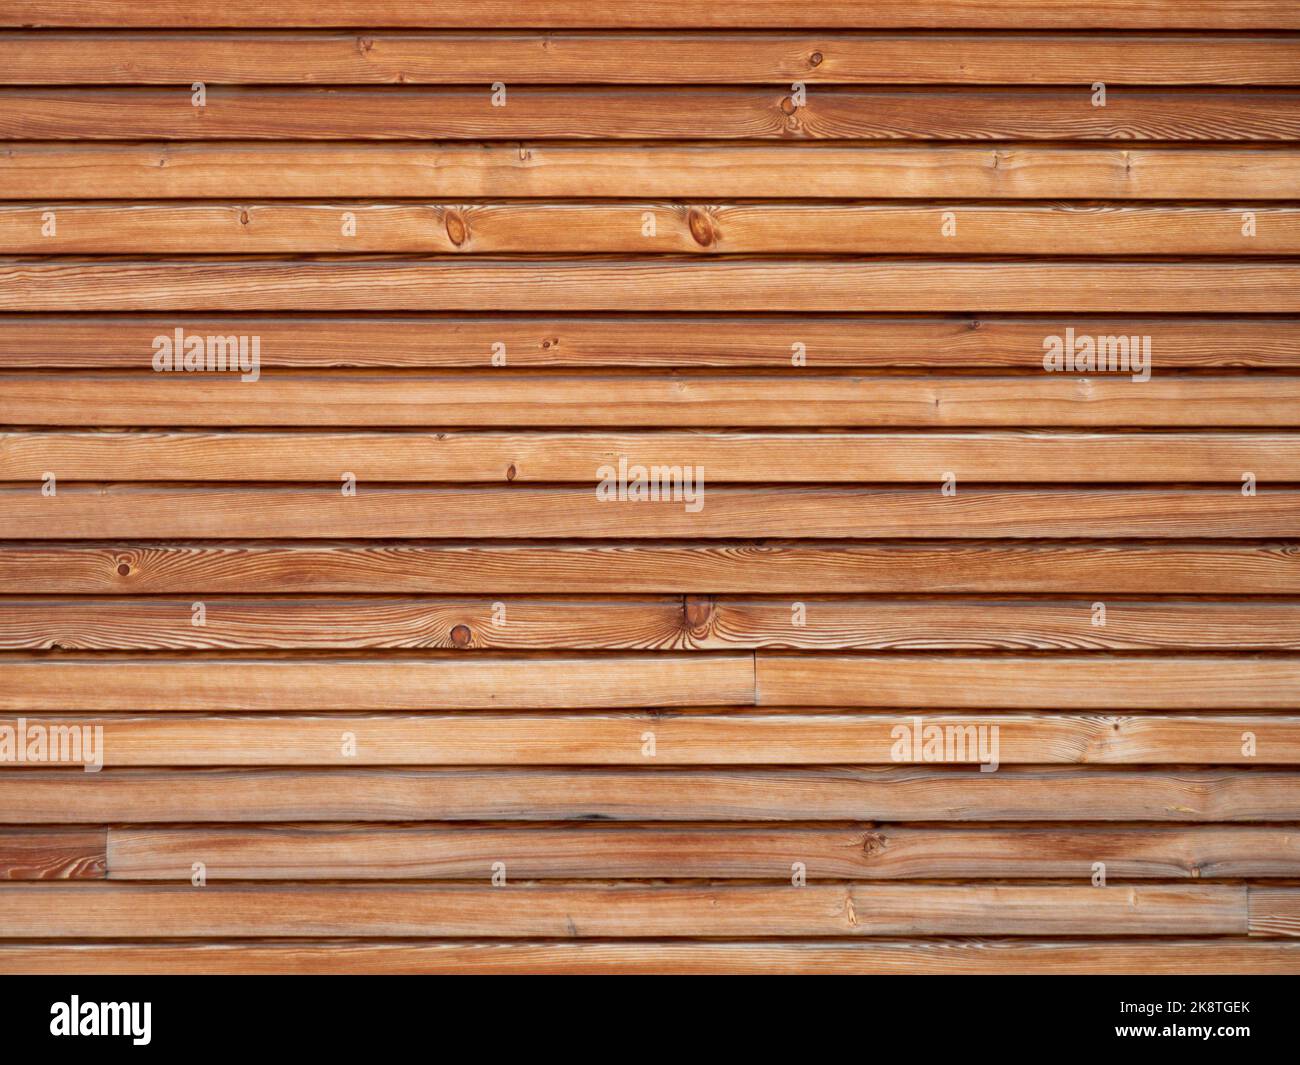 Wooden planks background texture. Timber boards in brown color with woodgrain structure. The design pattern is horizontal on a facade wall. Stock Photo